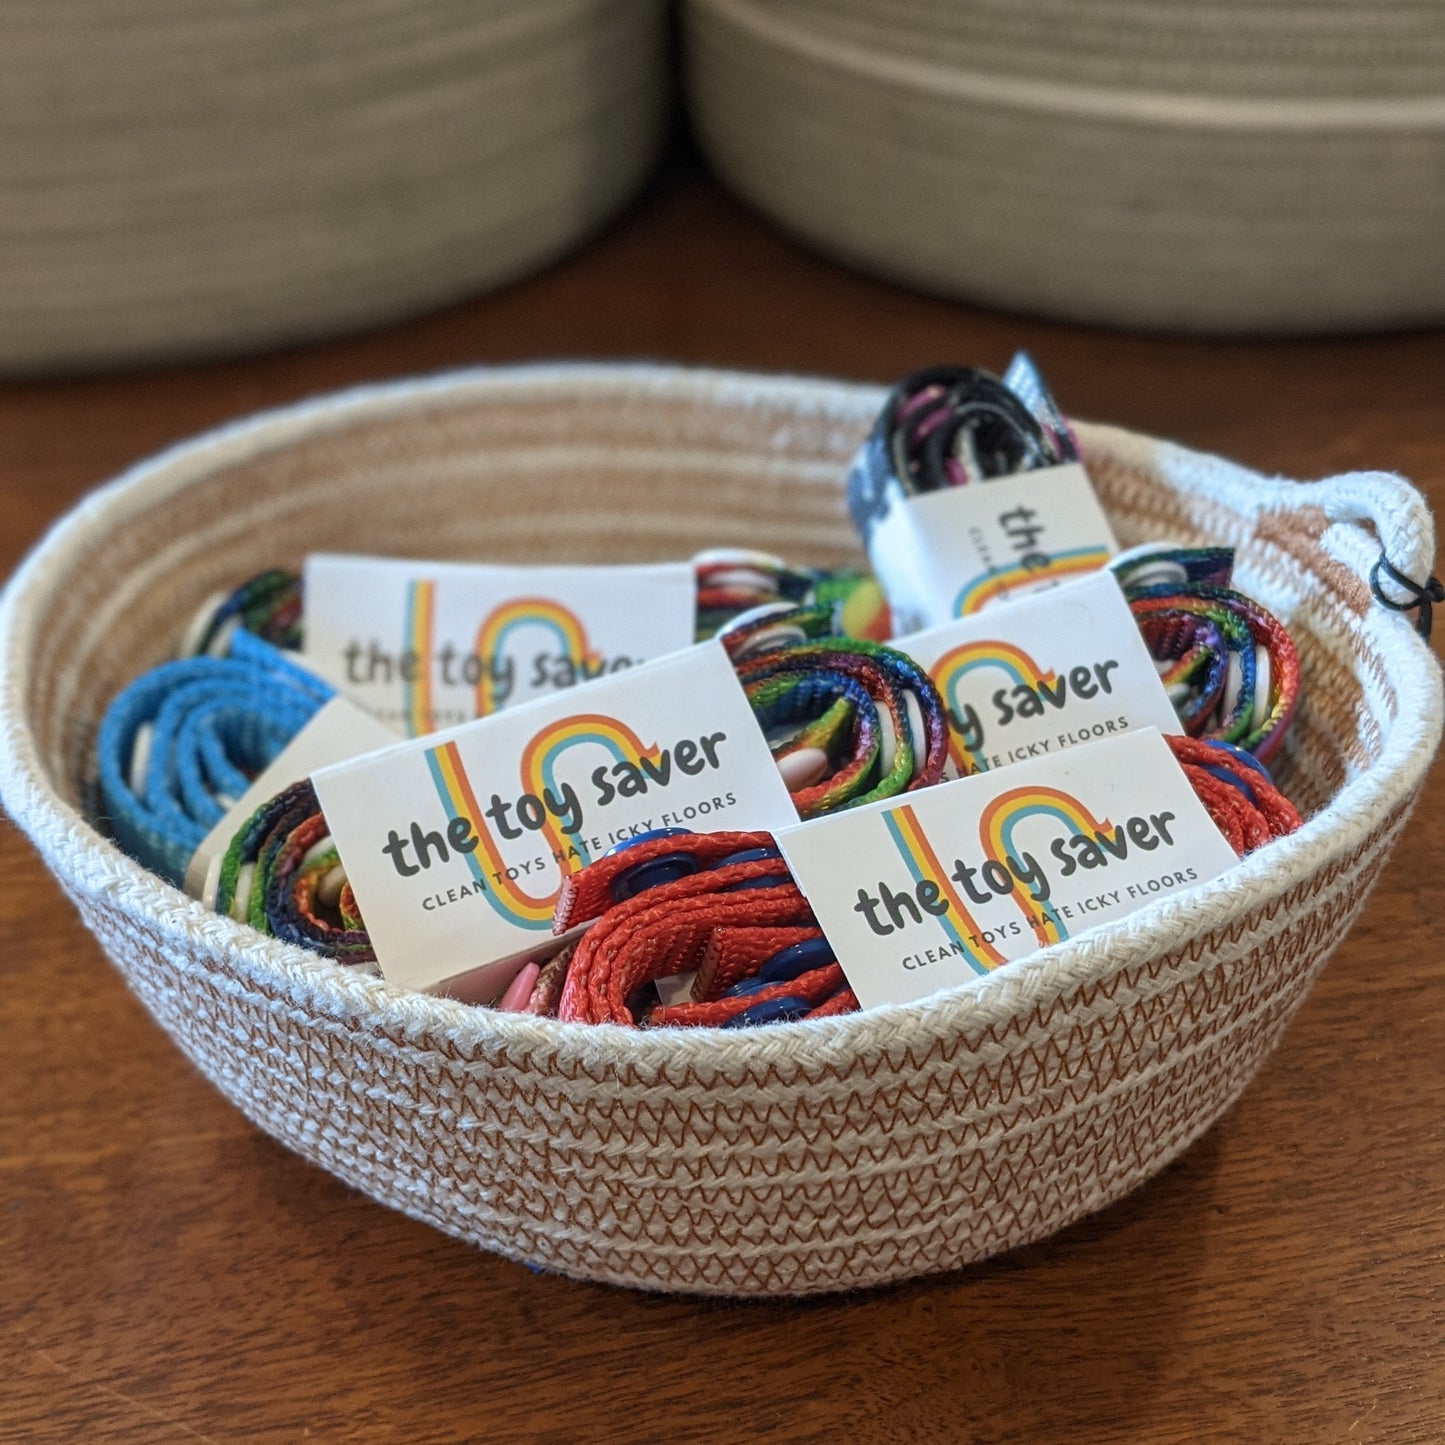 Rope baskets